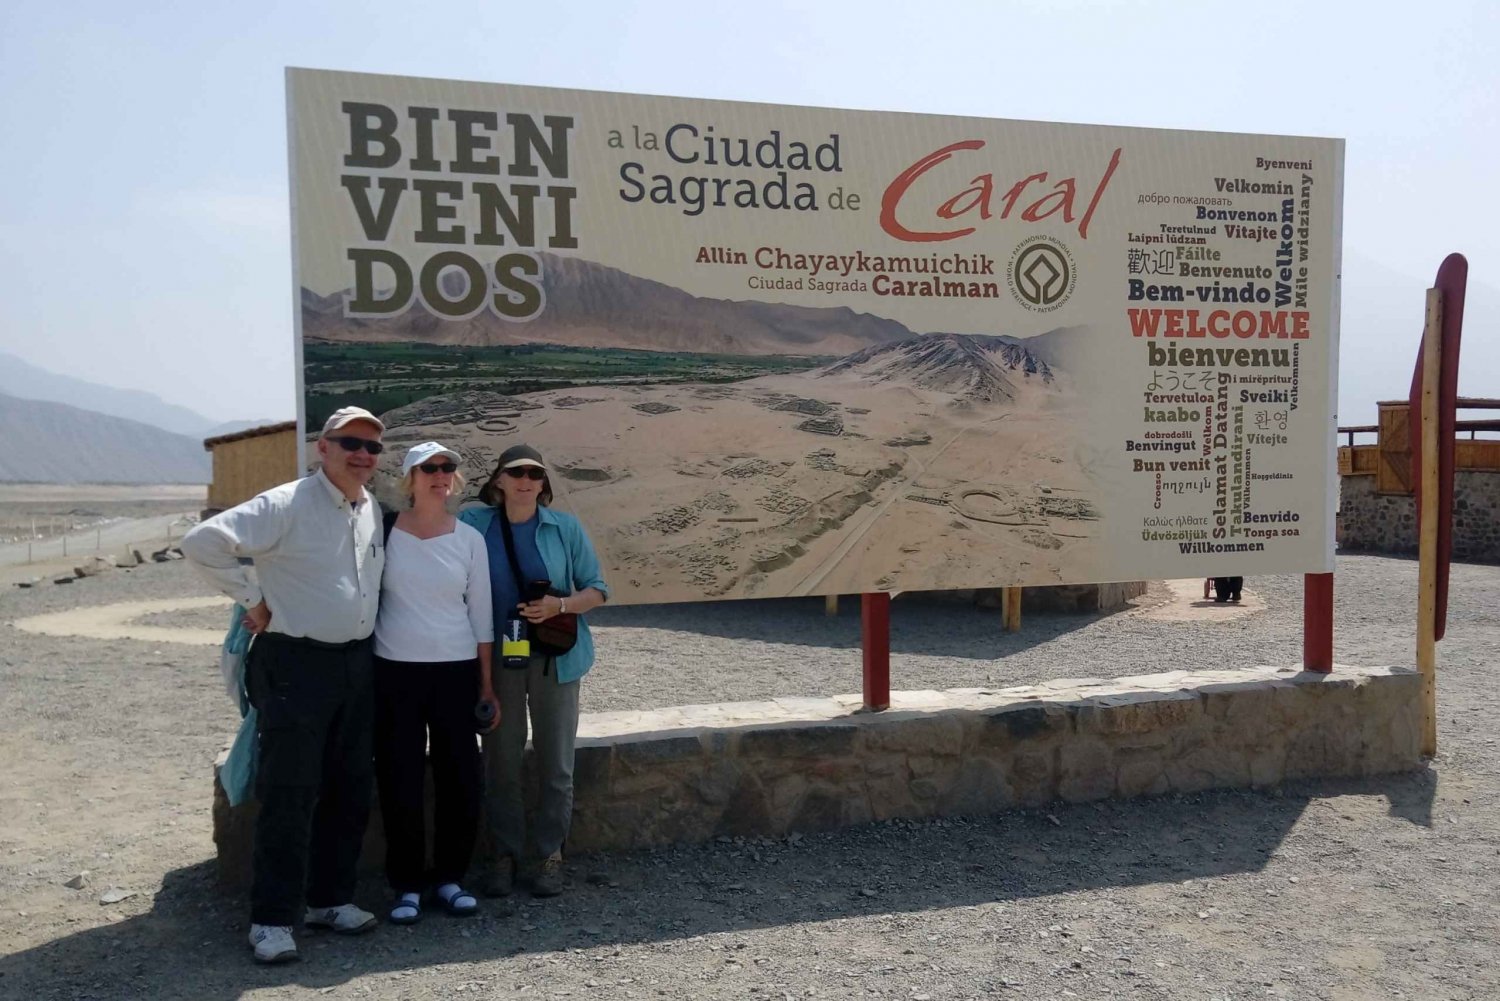 From Miraflores: Caral the Oldest Civilization in America